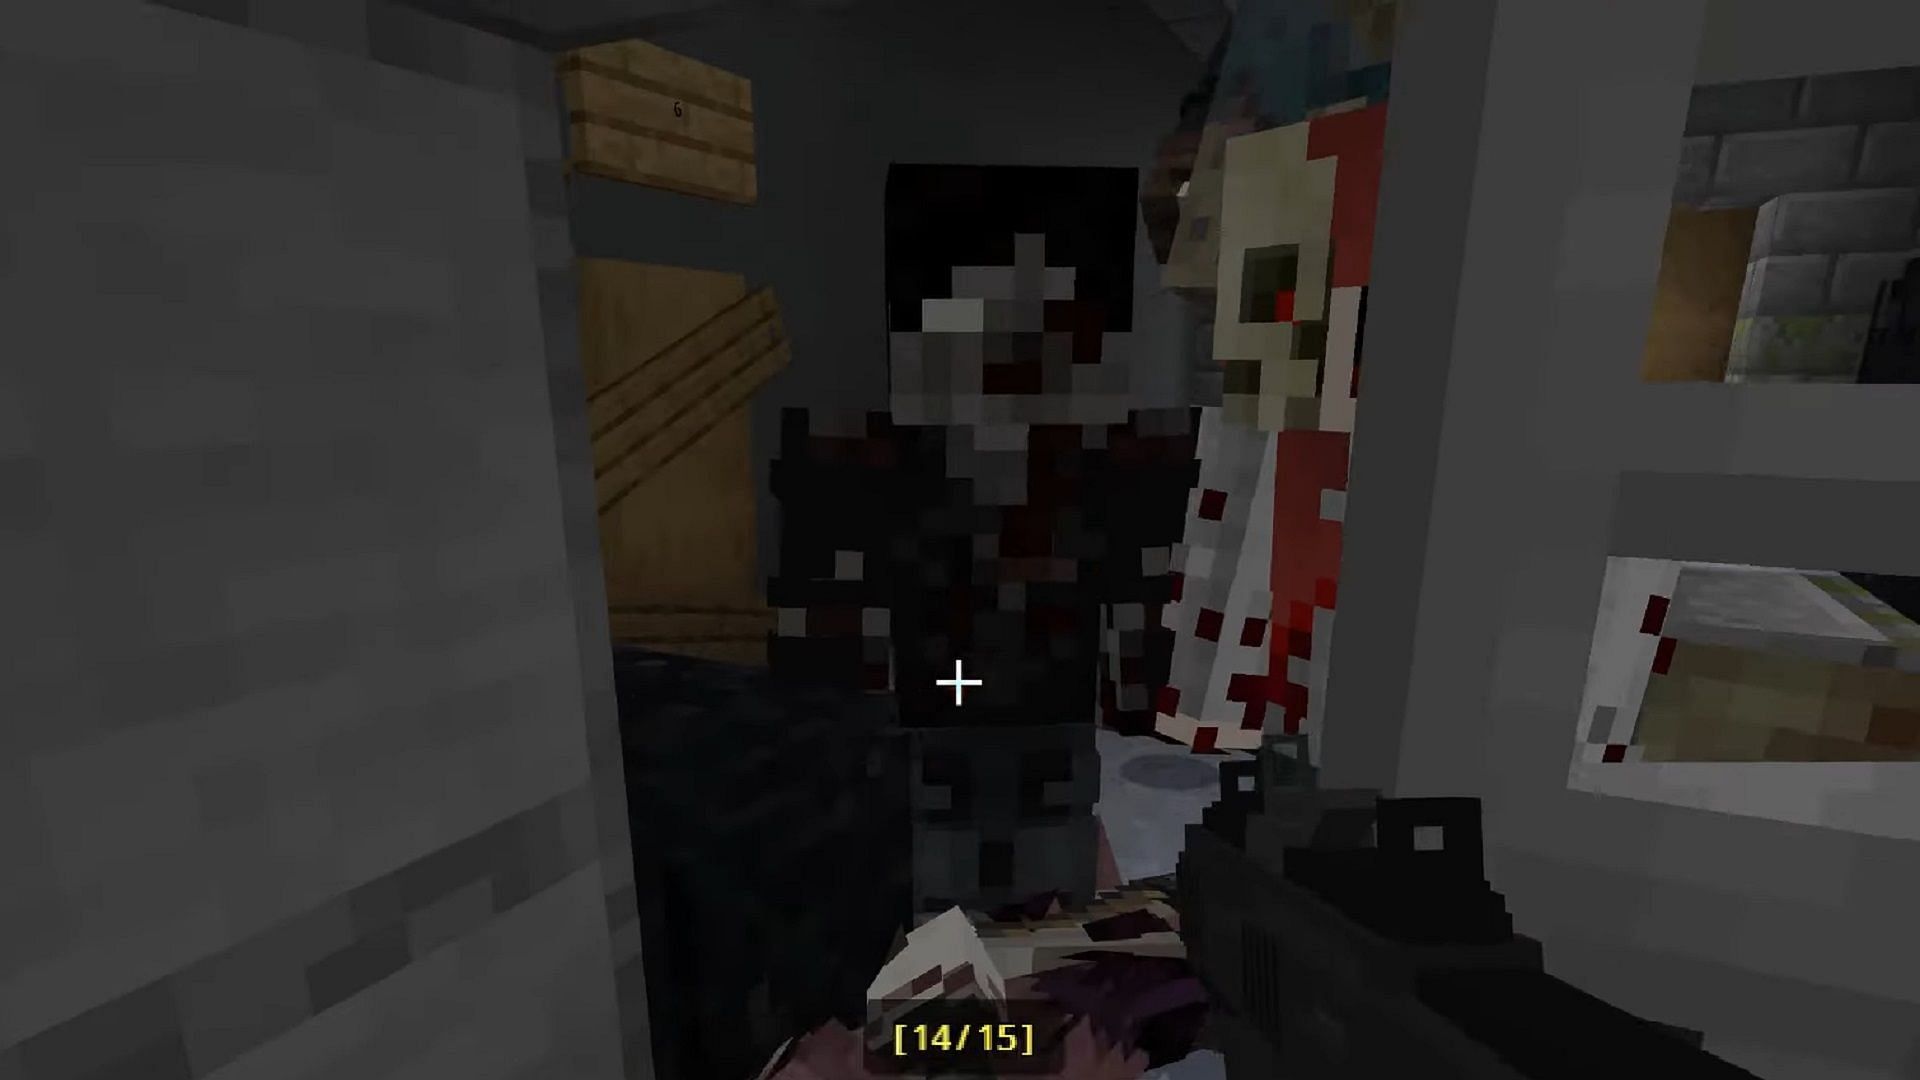 True Survival - Zombie Apocalypse makes survival gameplay incredibly intense in Minecraft (Image via Four Worlds Studios/YouTube)